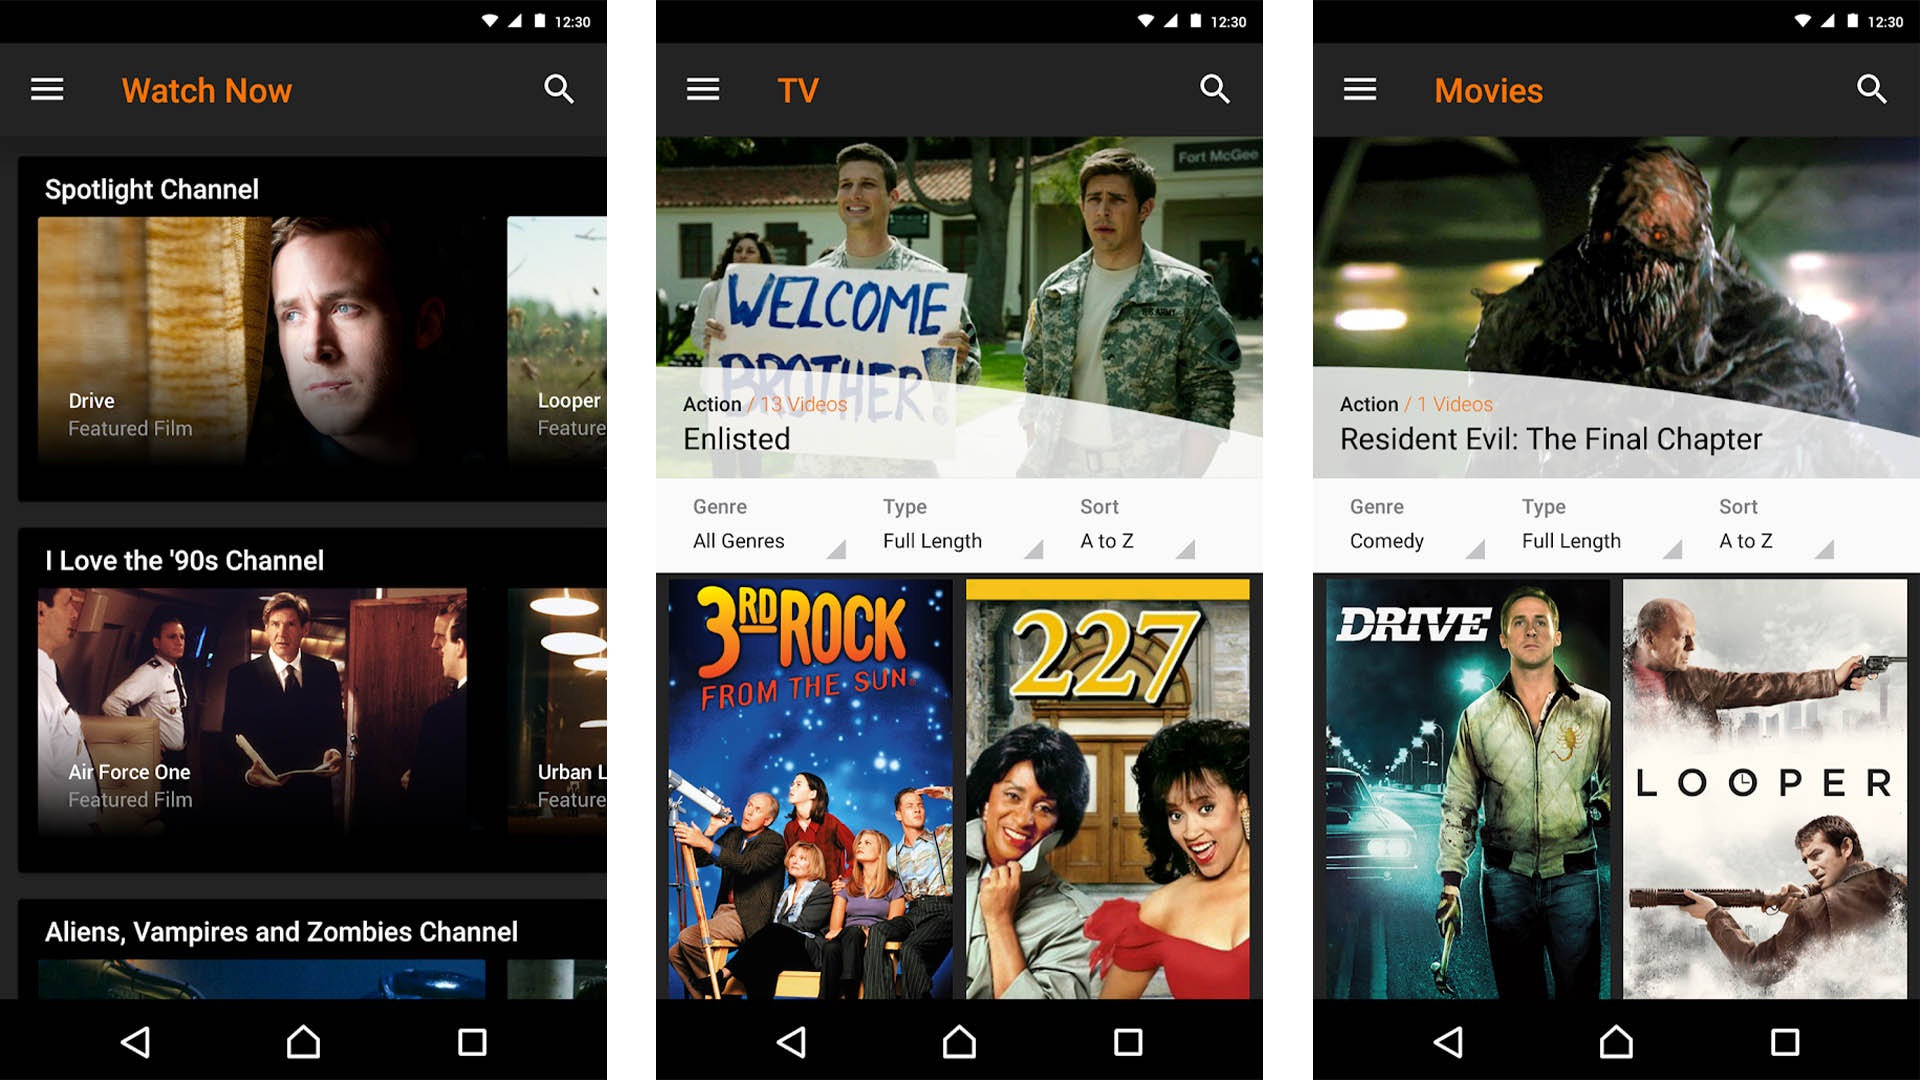 10 best legal free movie apps and free TV show apps